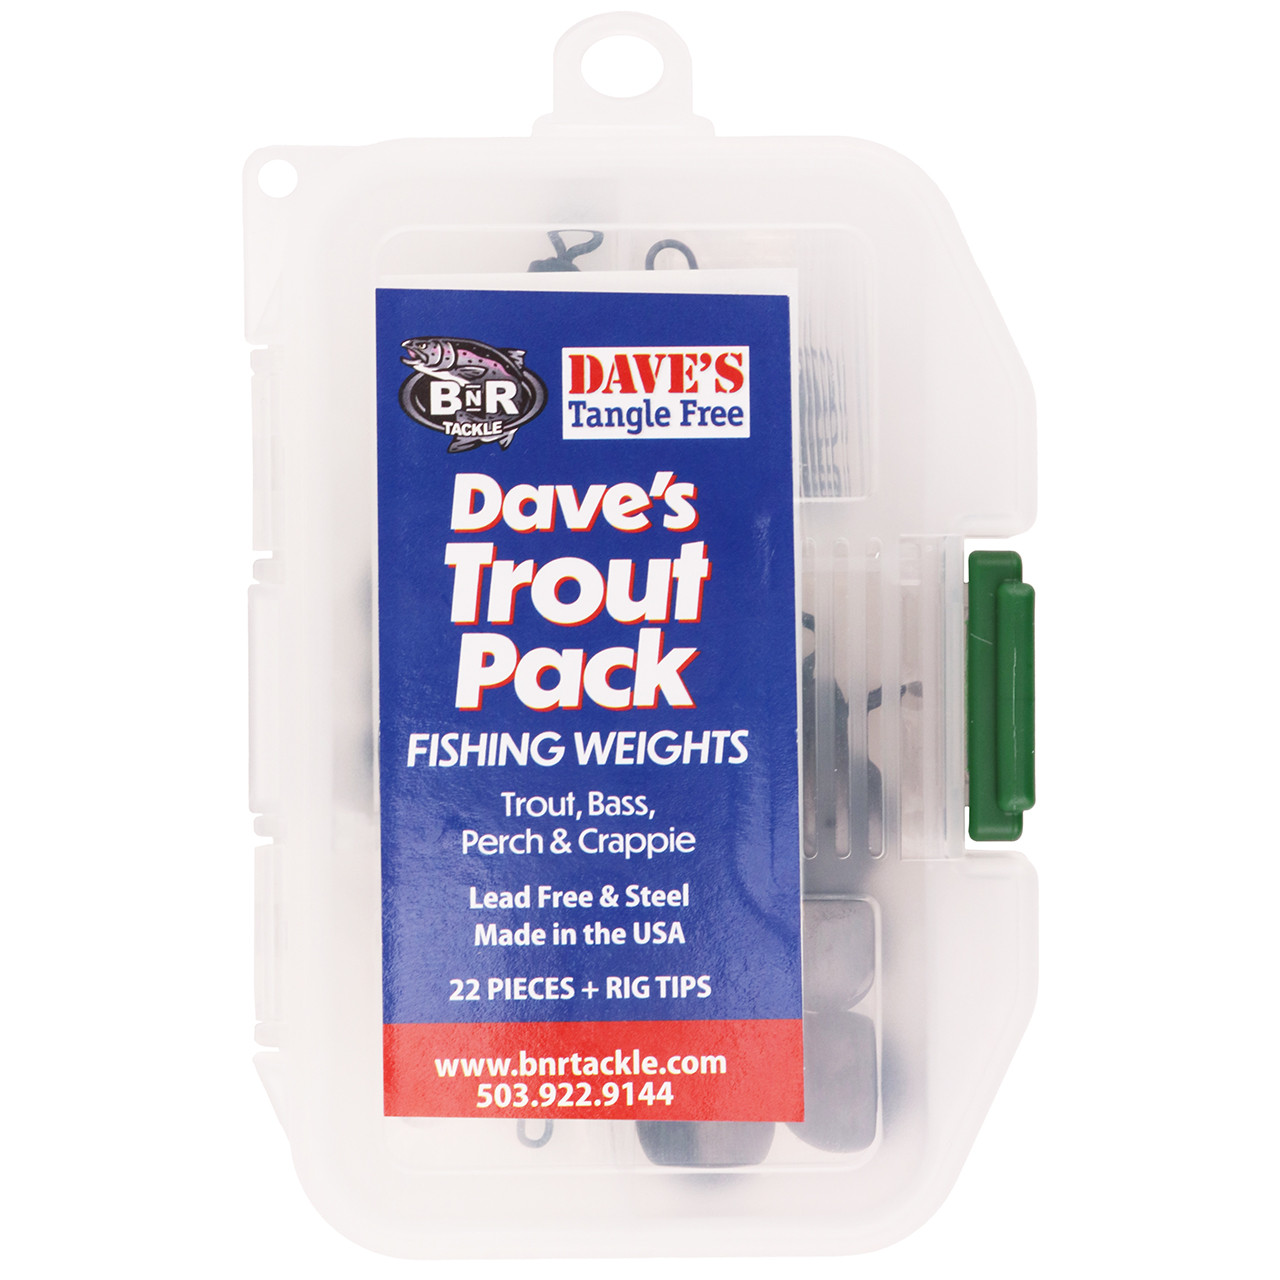 Dave's Tangle Free Trout Pack - FishUSA